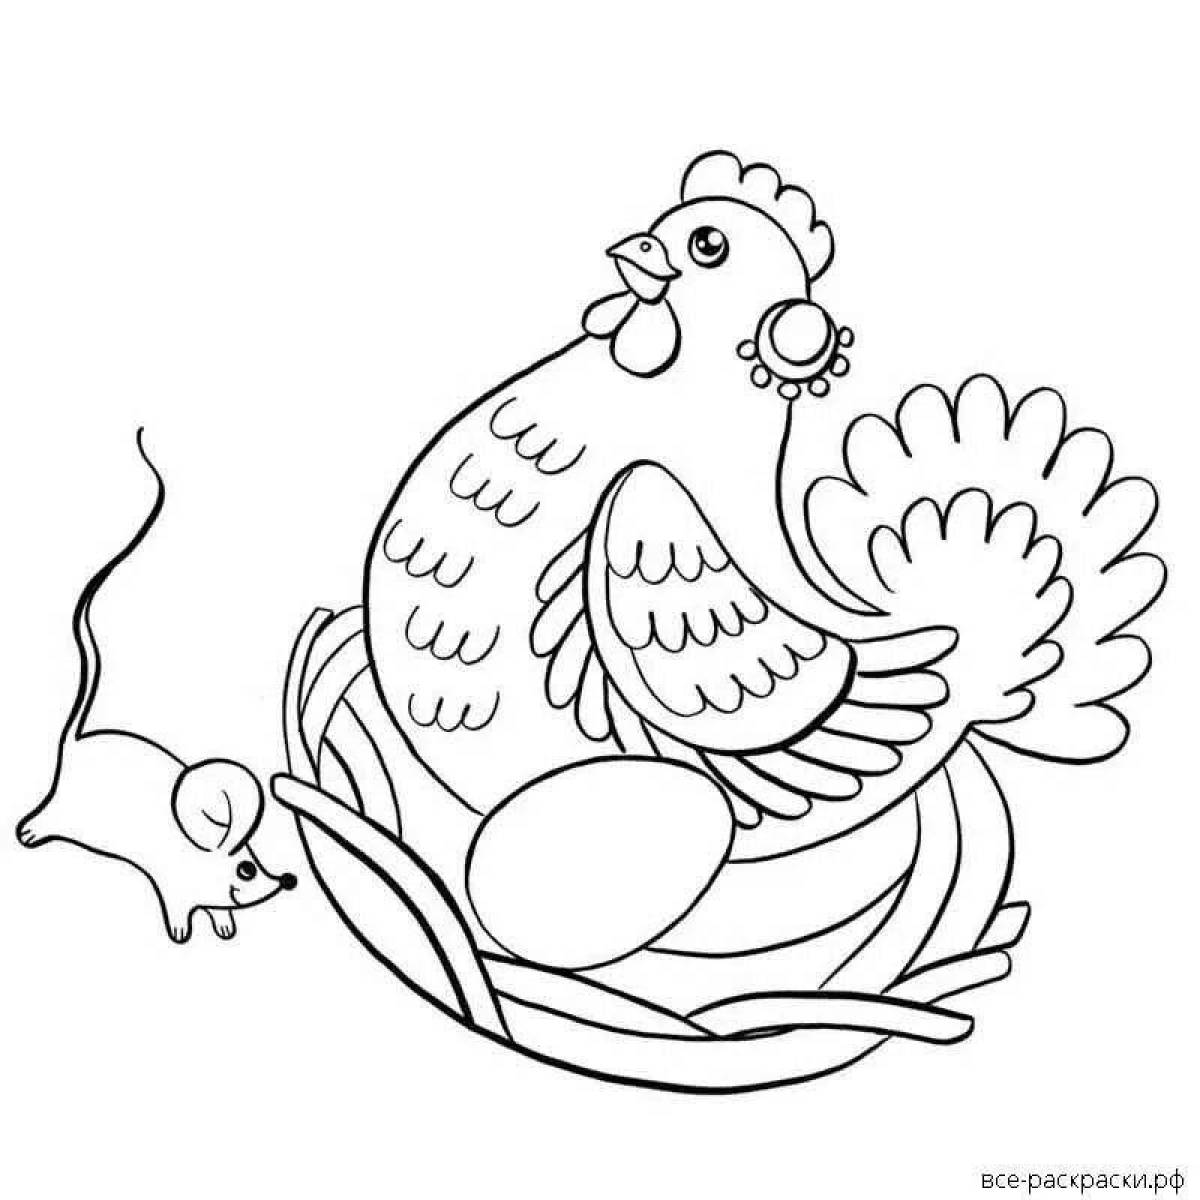 Elegant coloring fairy tale hen pockmarked